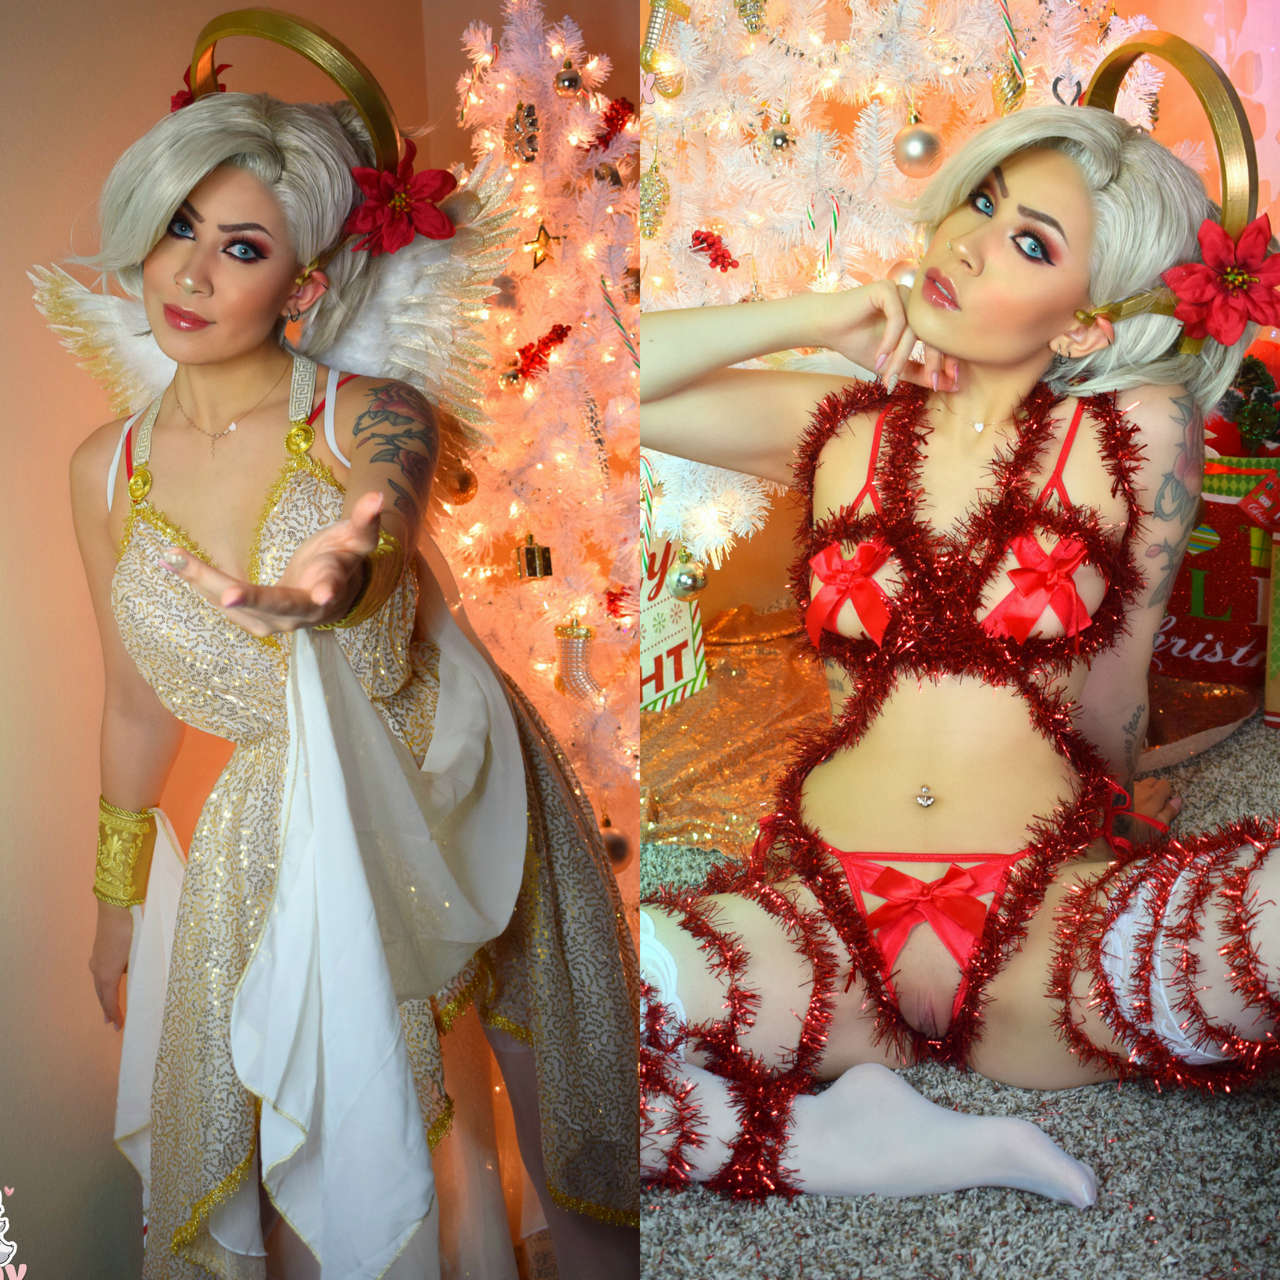 Self Christmas Angel Mercy Concept On Off Cosplay From Overwatch By Felicia Vox O